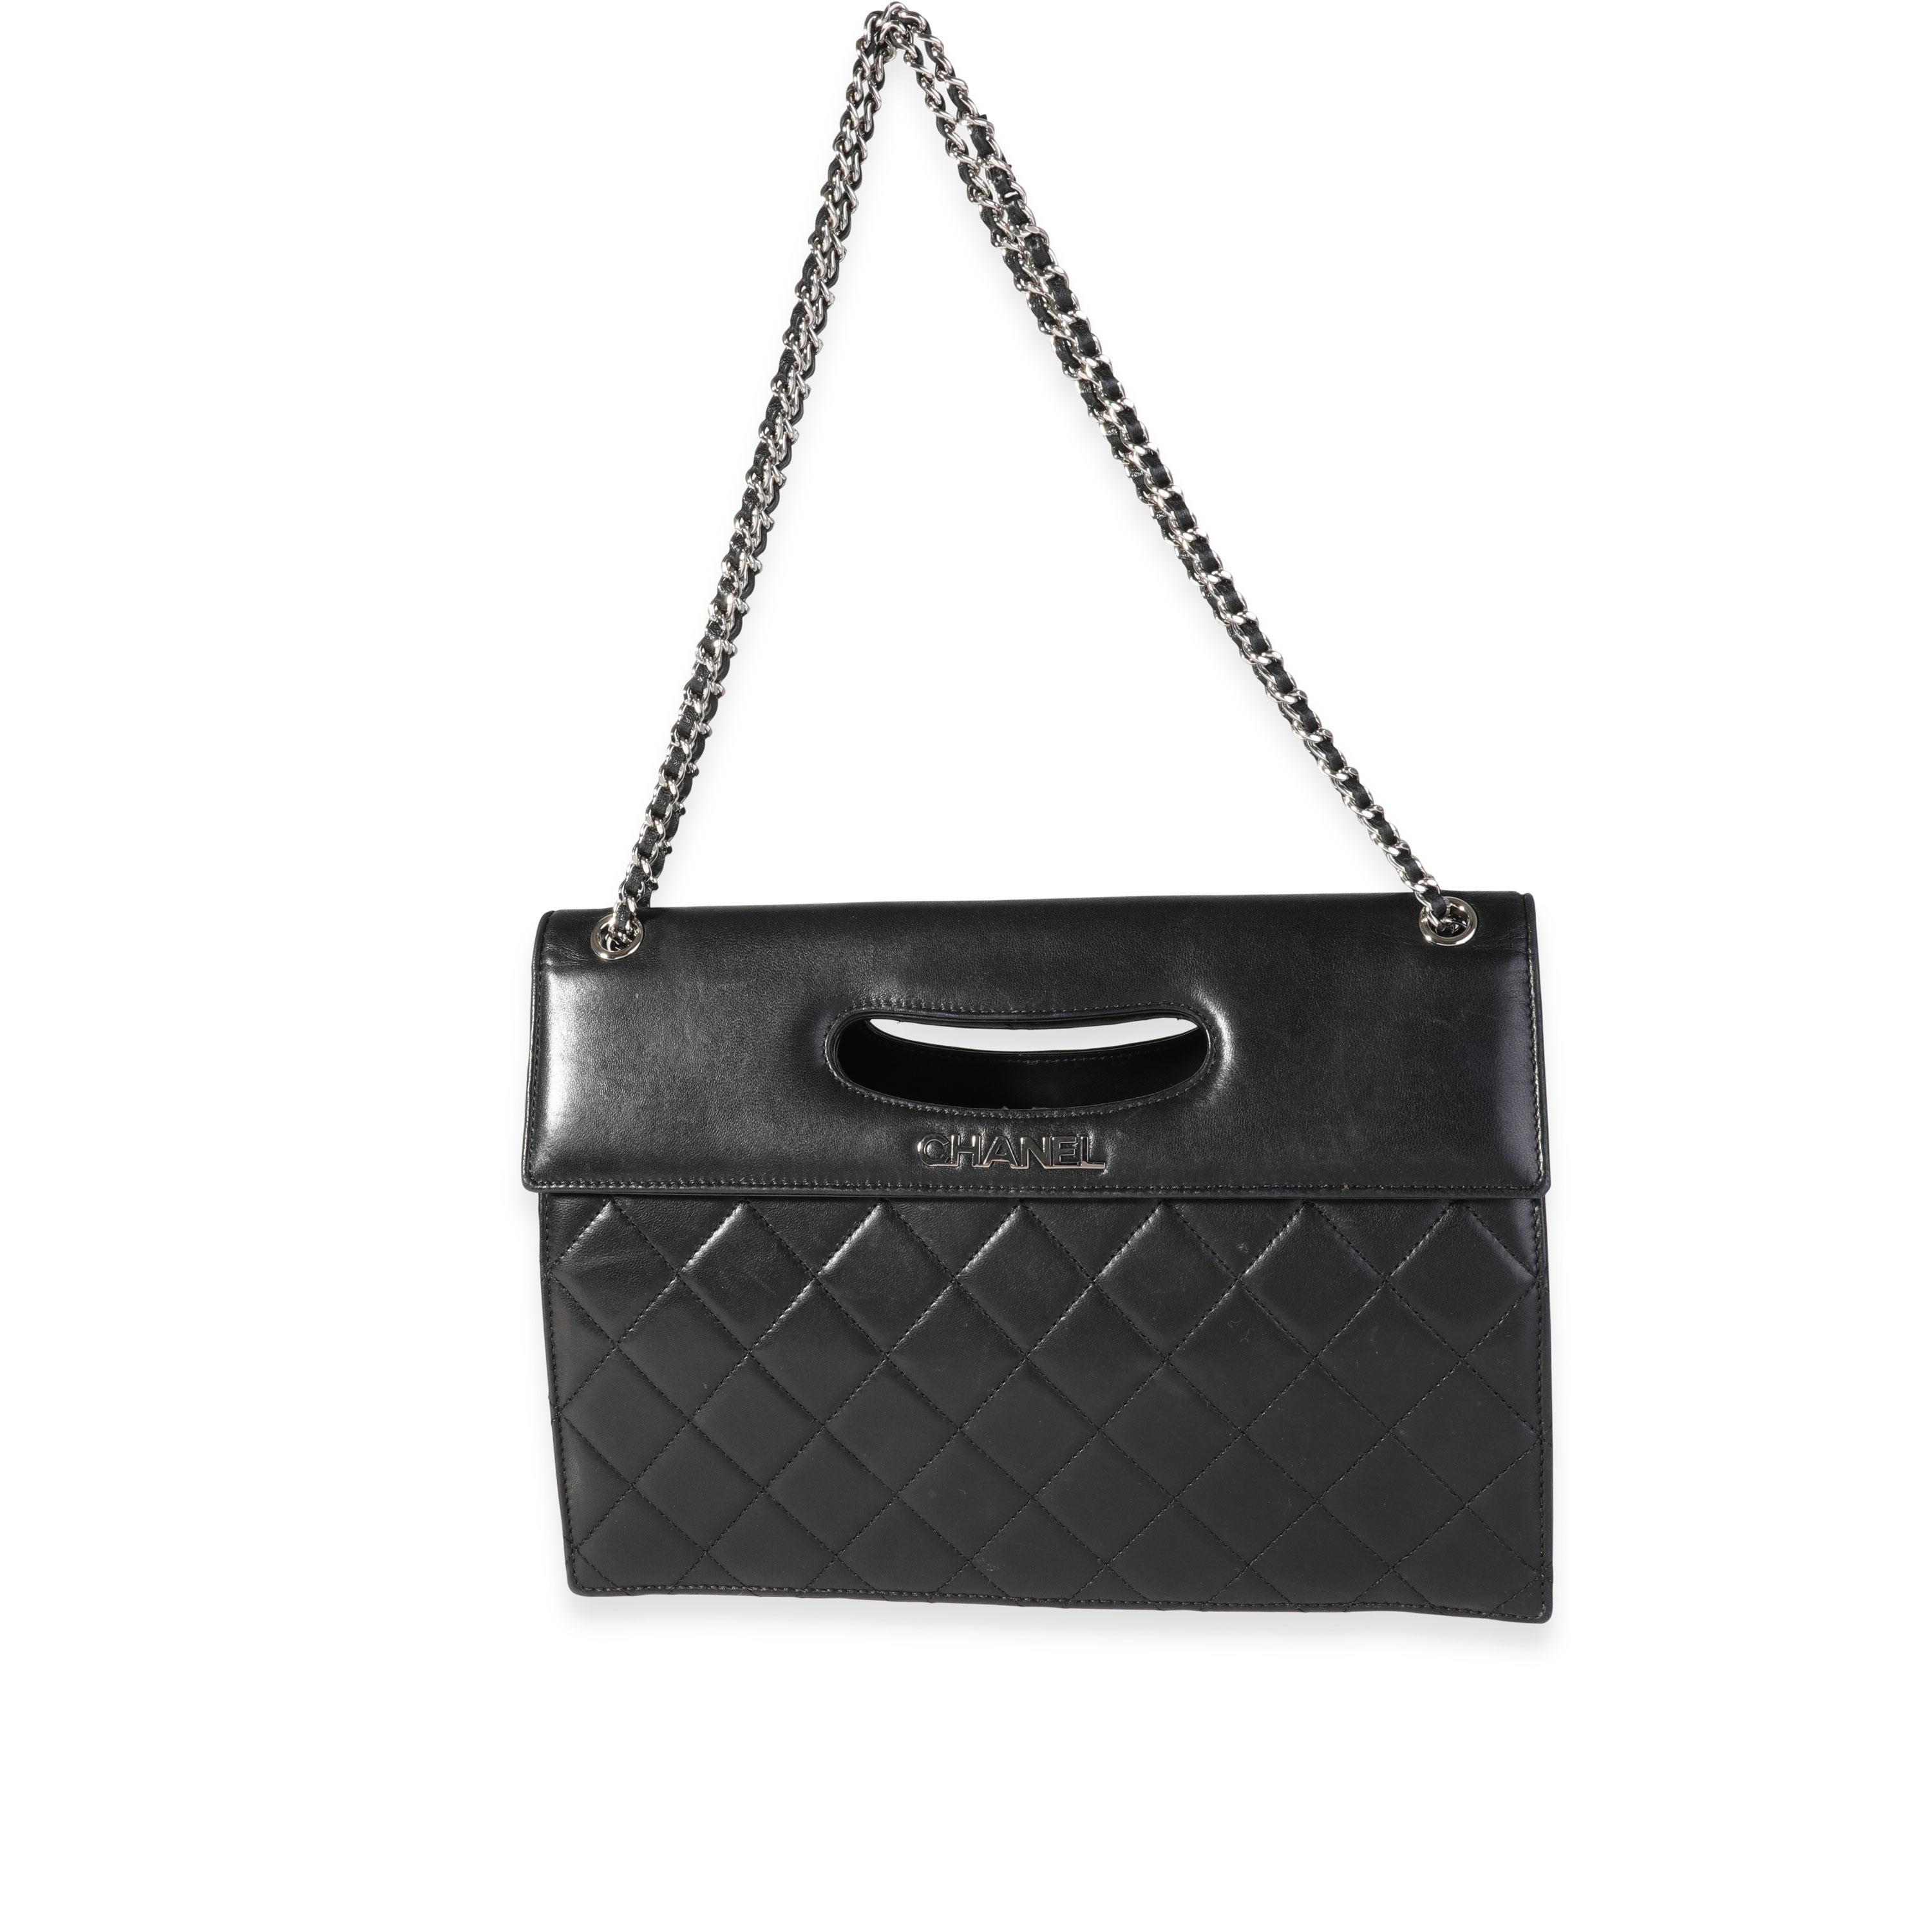 Listing Title: Chanel Black Quilted Lambskin Cut-Out Frame Clutch With Chain
SKU: 119438
Condition: Pre-owned (3000)
Handbag Condition: Very Good
Condition Comments: Minor scratches throughout leather. Light mark at exterior back corner.
Brand: